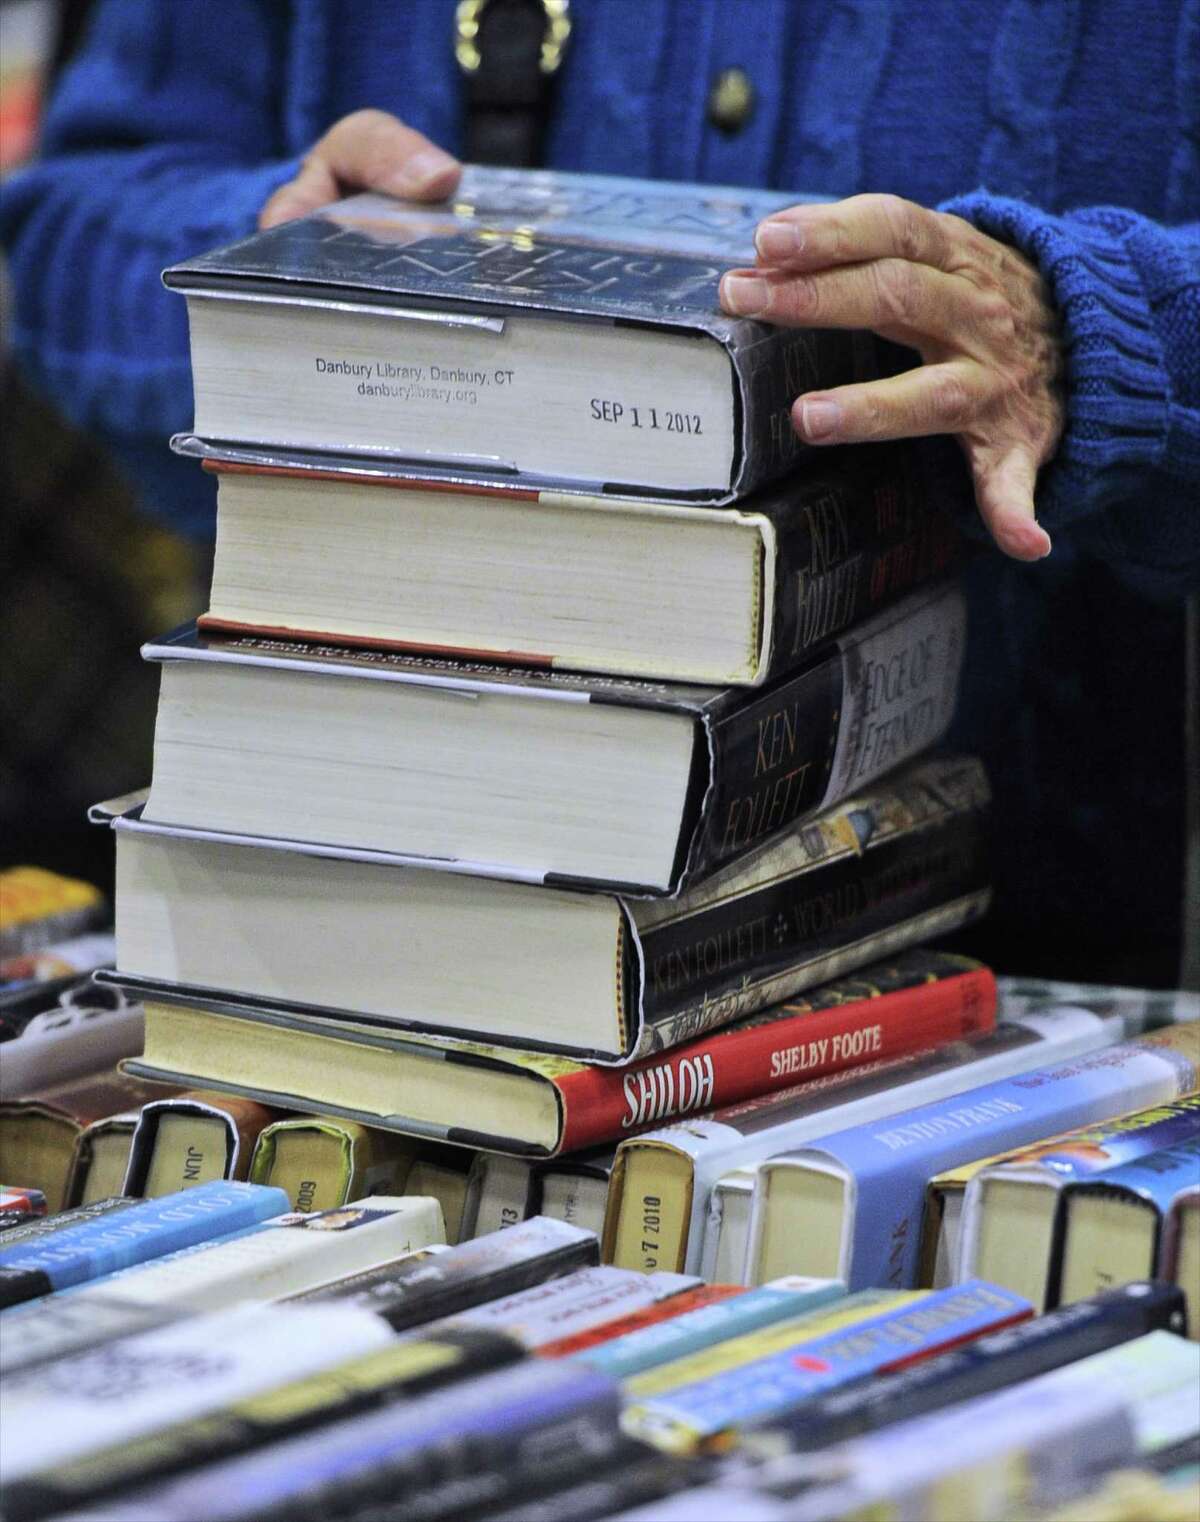 A stack of books at the Friends of Danbury Library annual book sale, held at the Danbury PAL building on Saturday, October 8, 2016, in Danbury, Conn.